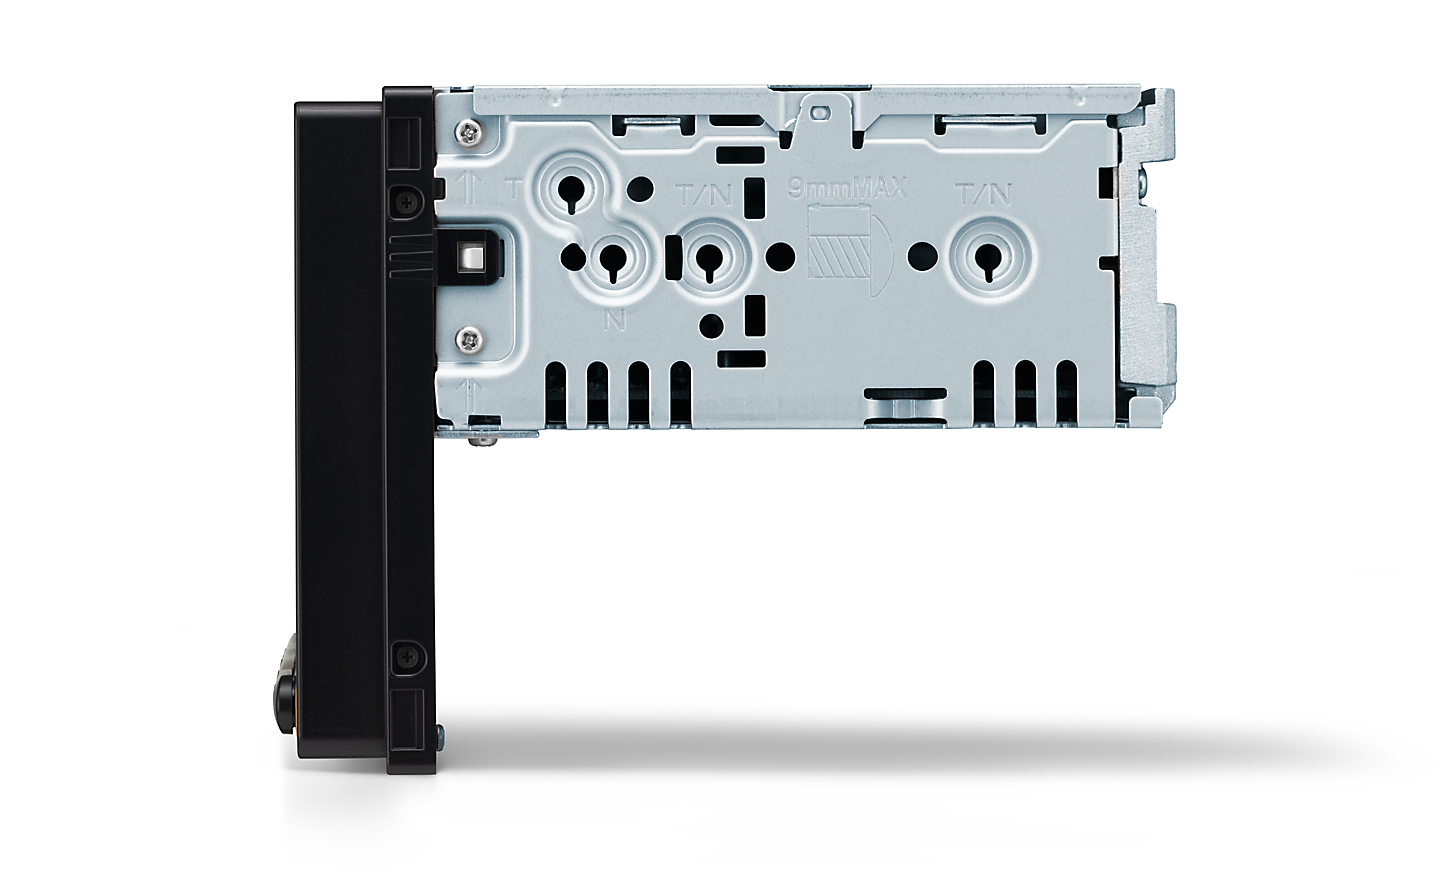 Side view of the XAV-900ES media receiver chassis. 